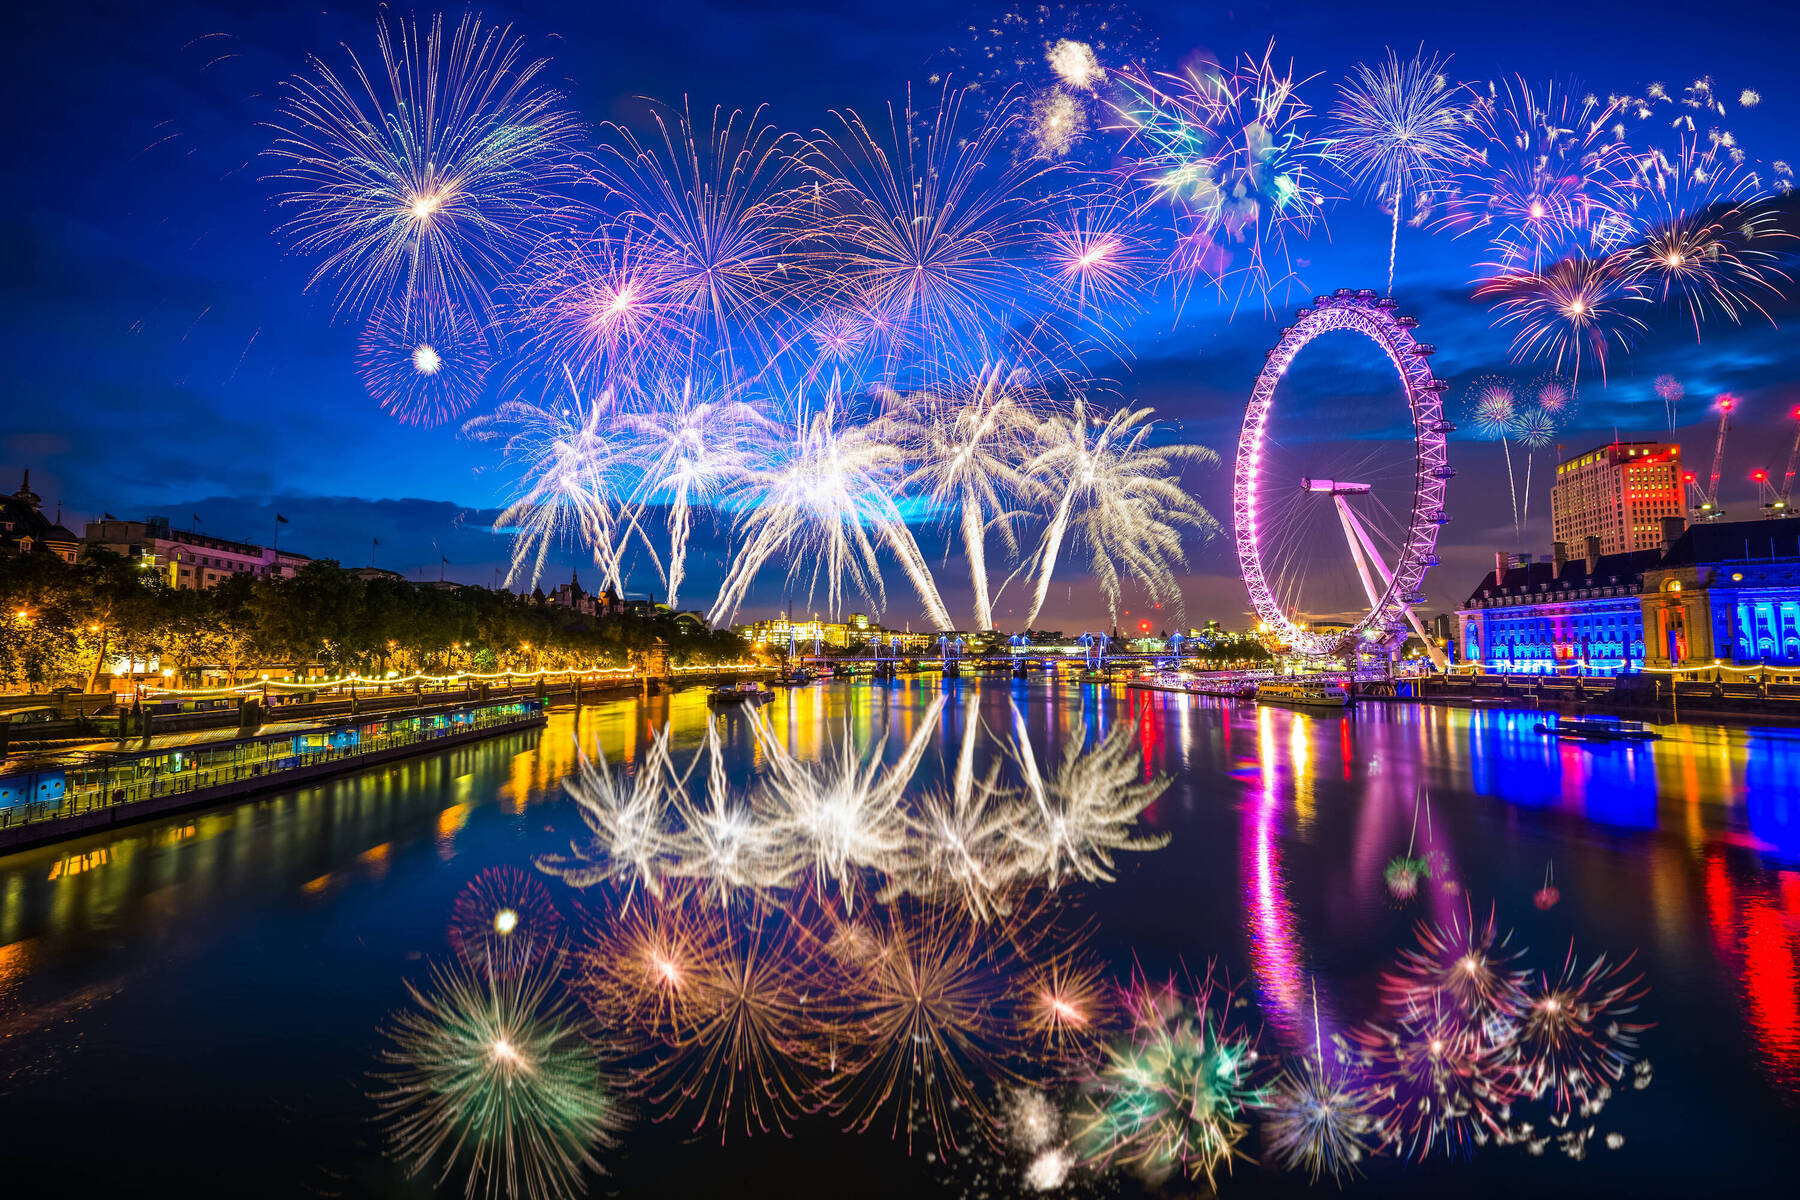 Enjoy unobstructed views of London's NYE fireworks